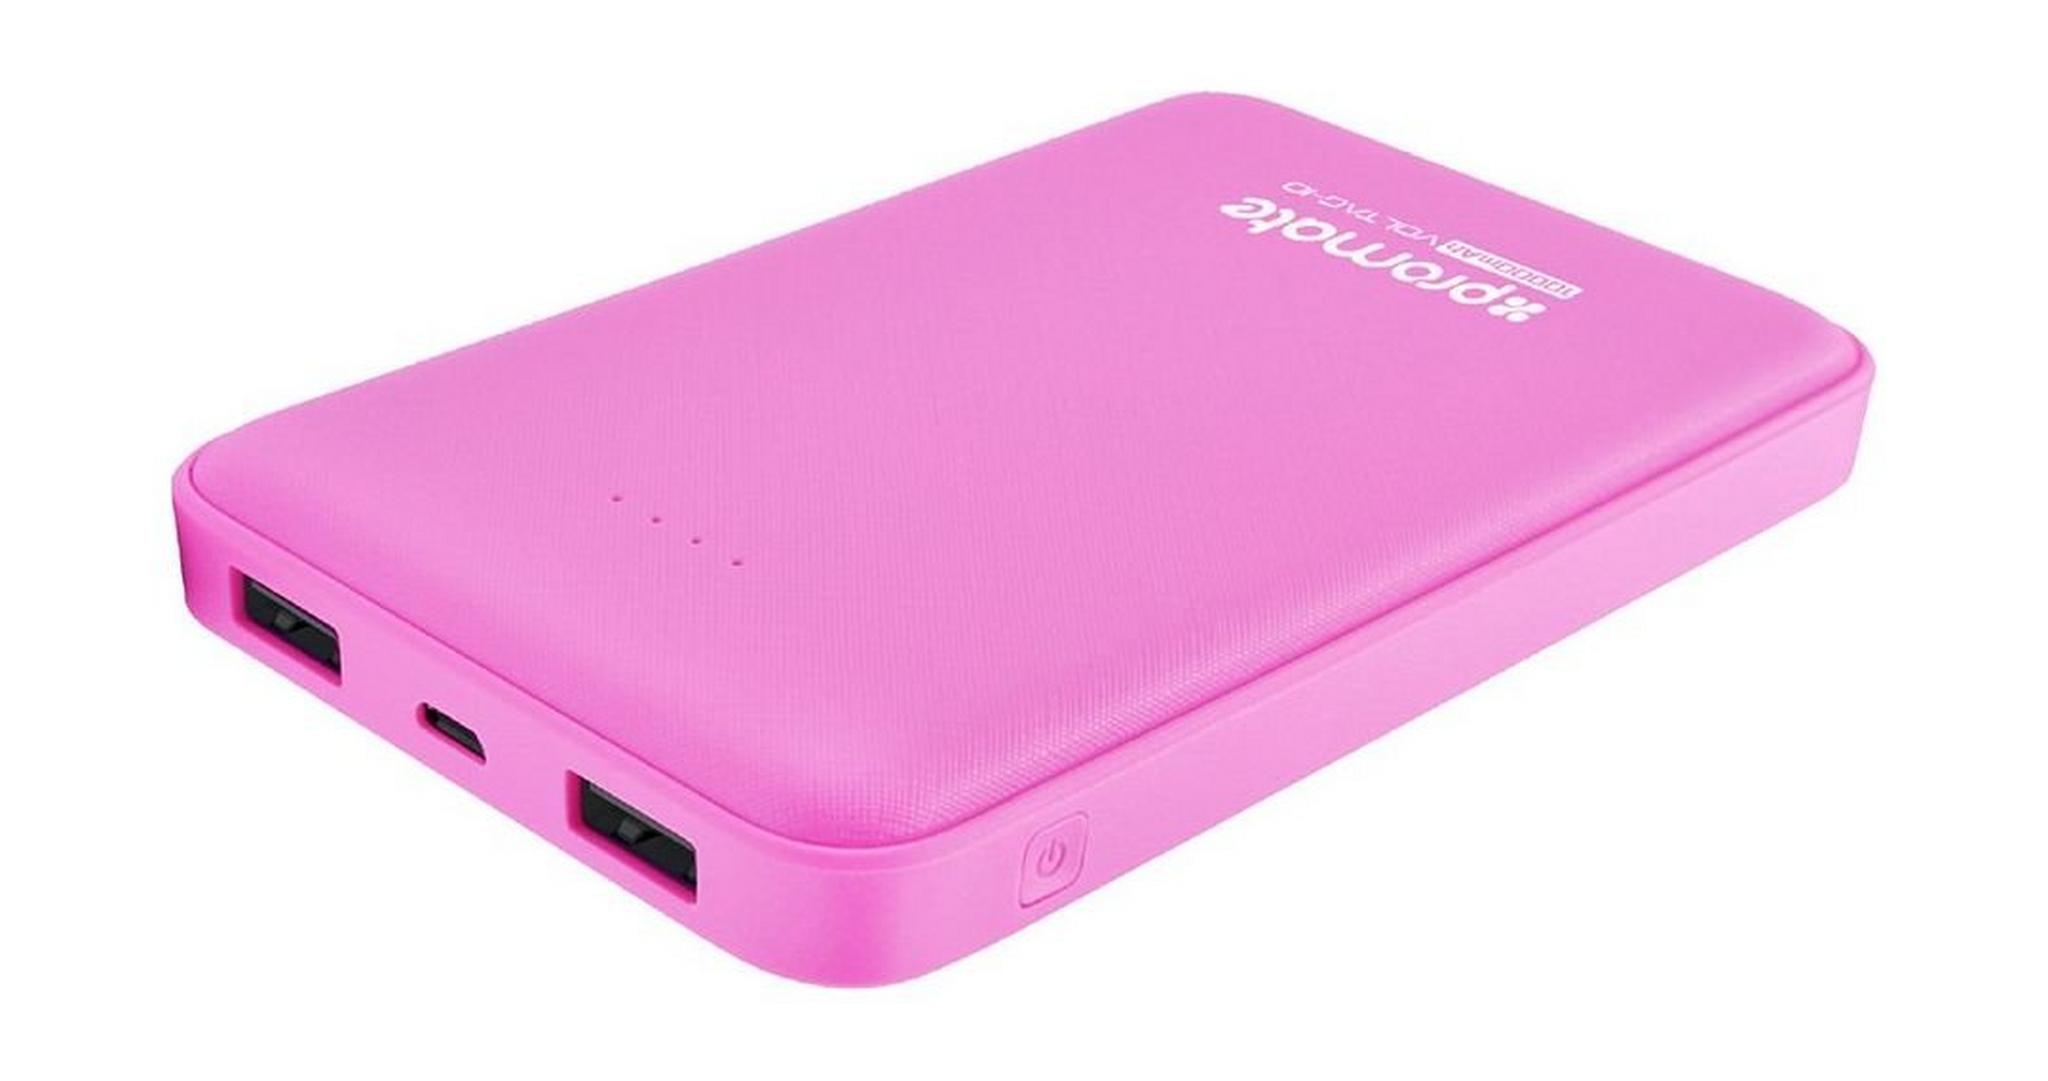 Promate Voltag 10000mAh Ultra-Fast Power Bank with Dual USB Port – Pink